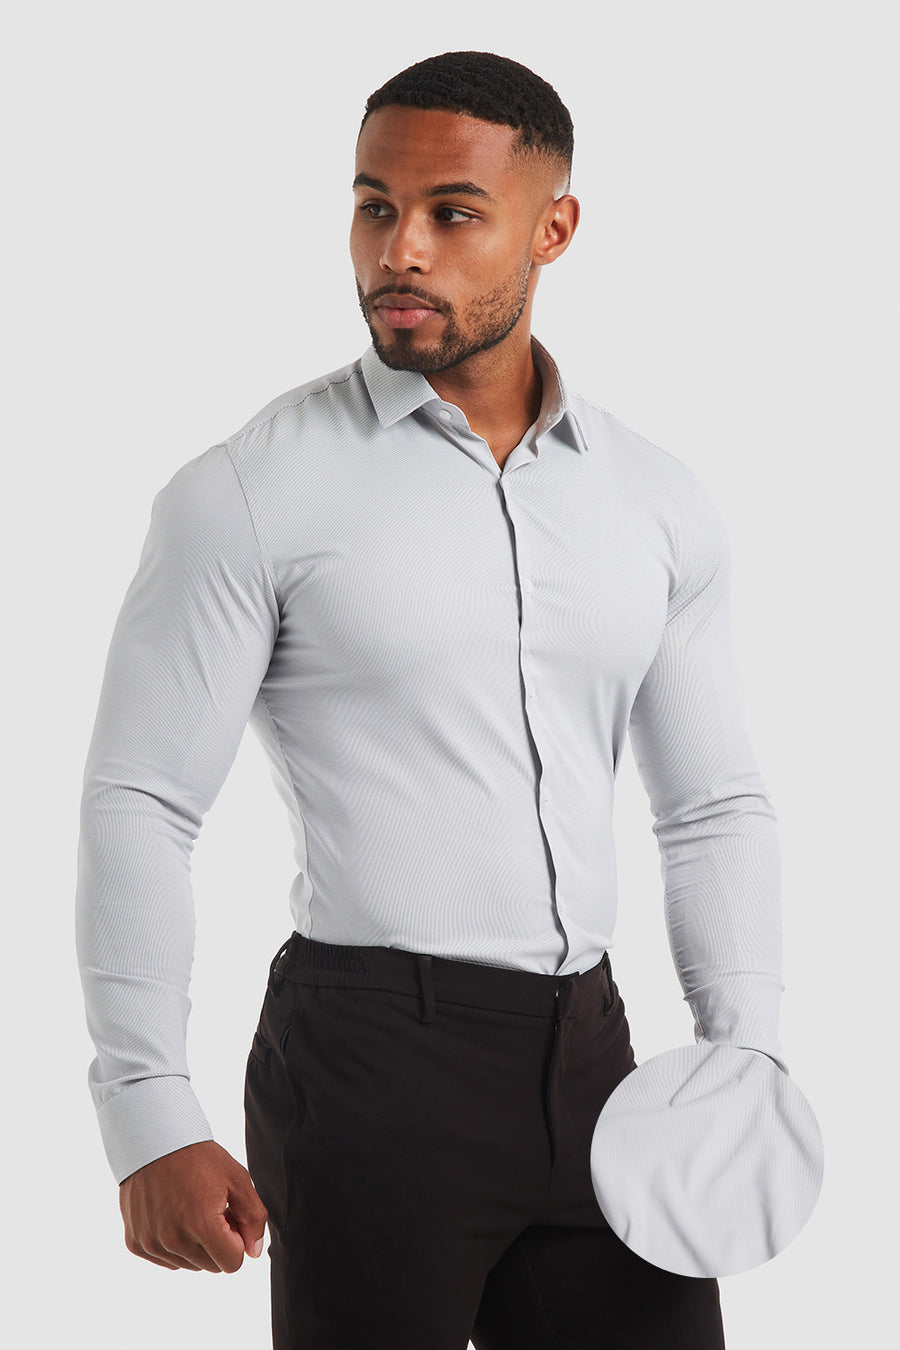 Performance Business Shirt in Navy Stripe - TAILORED ATHLETE - USA